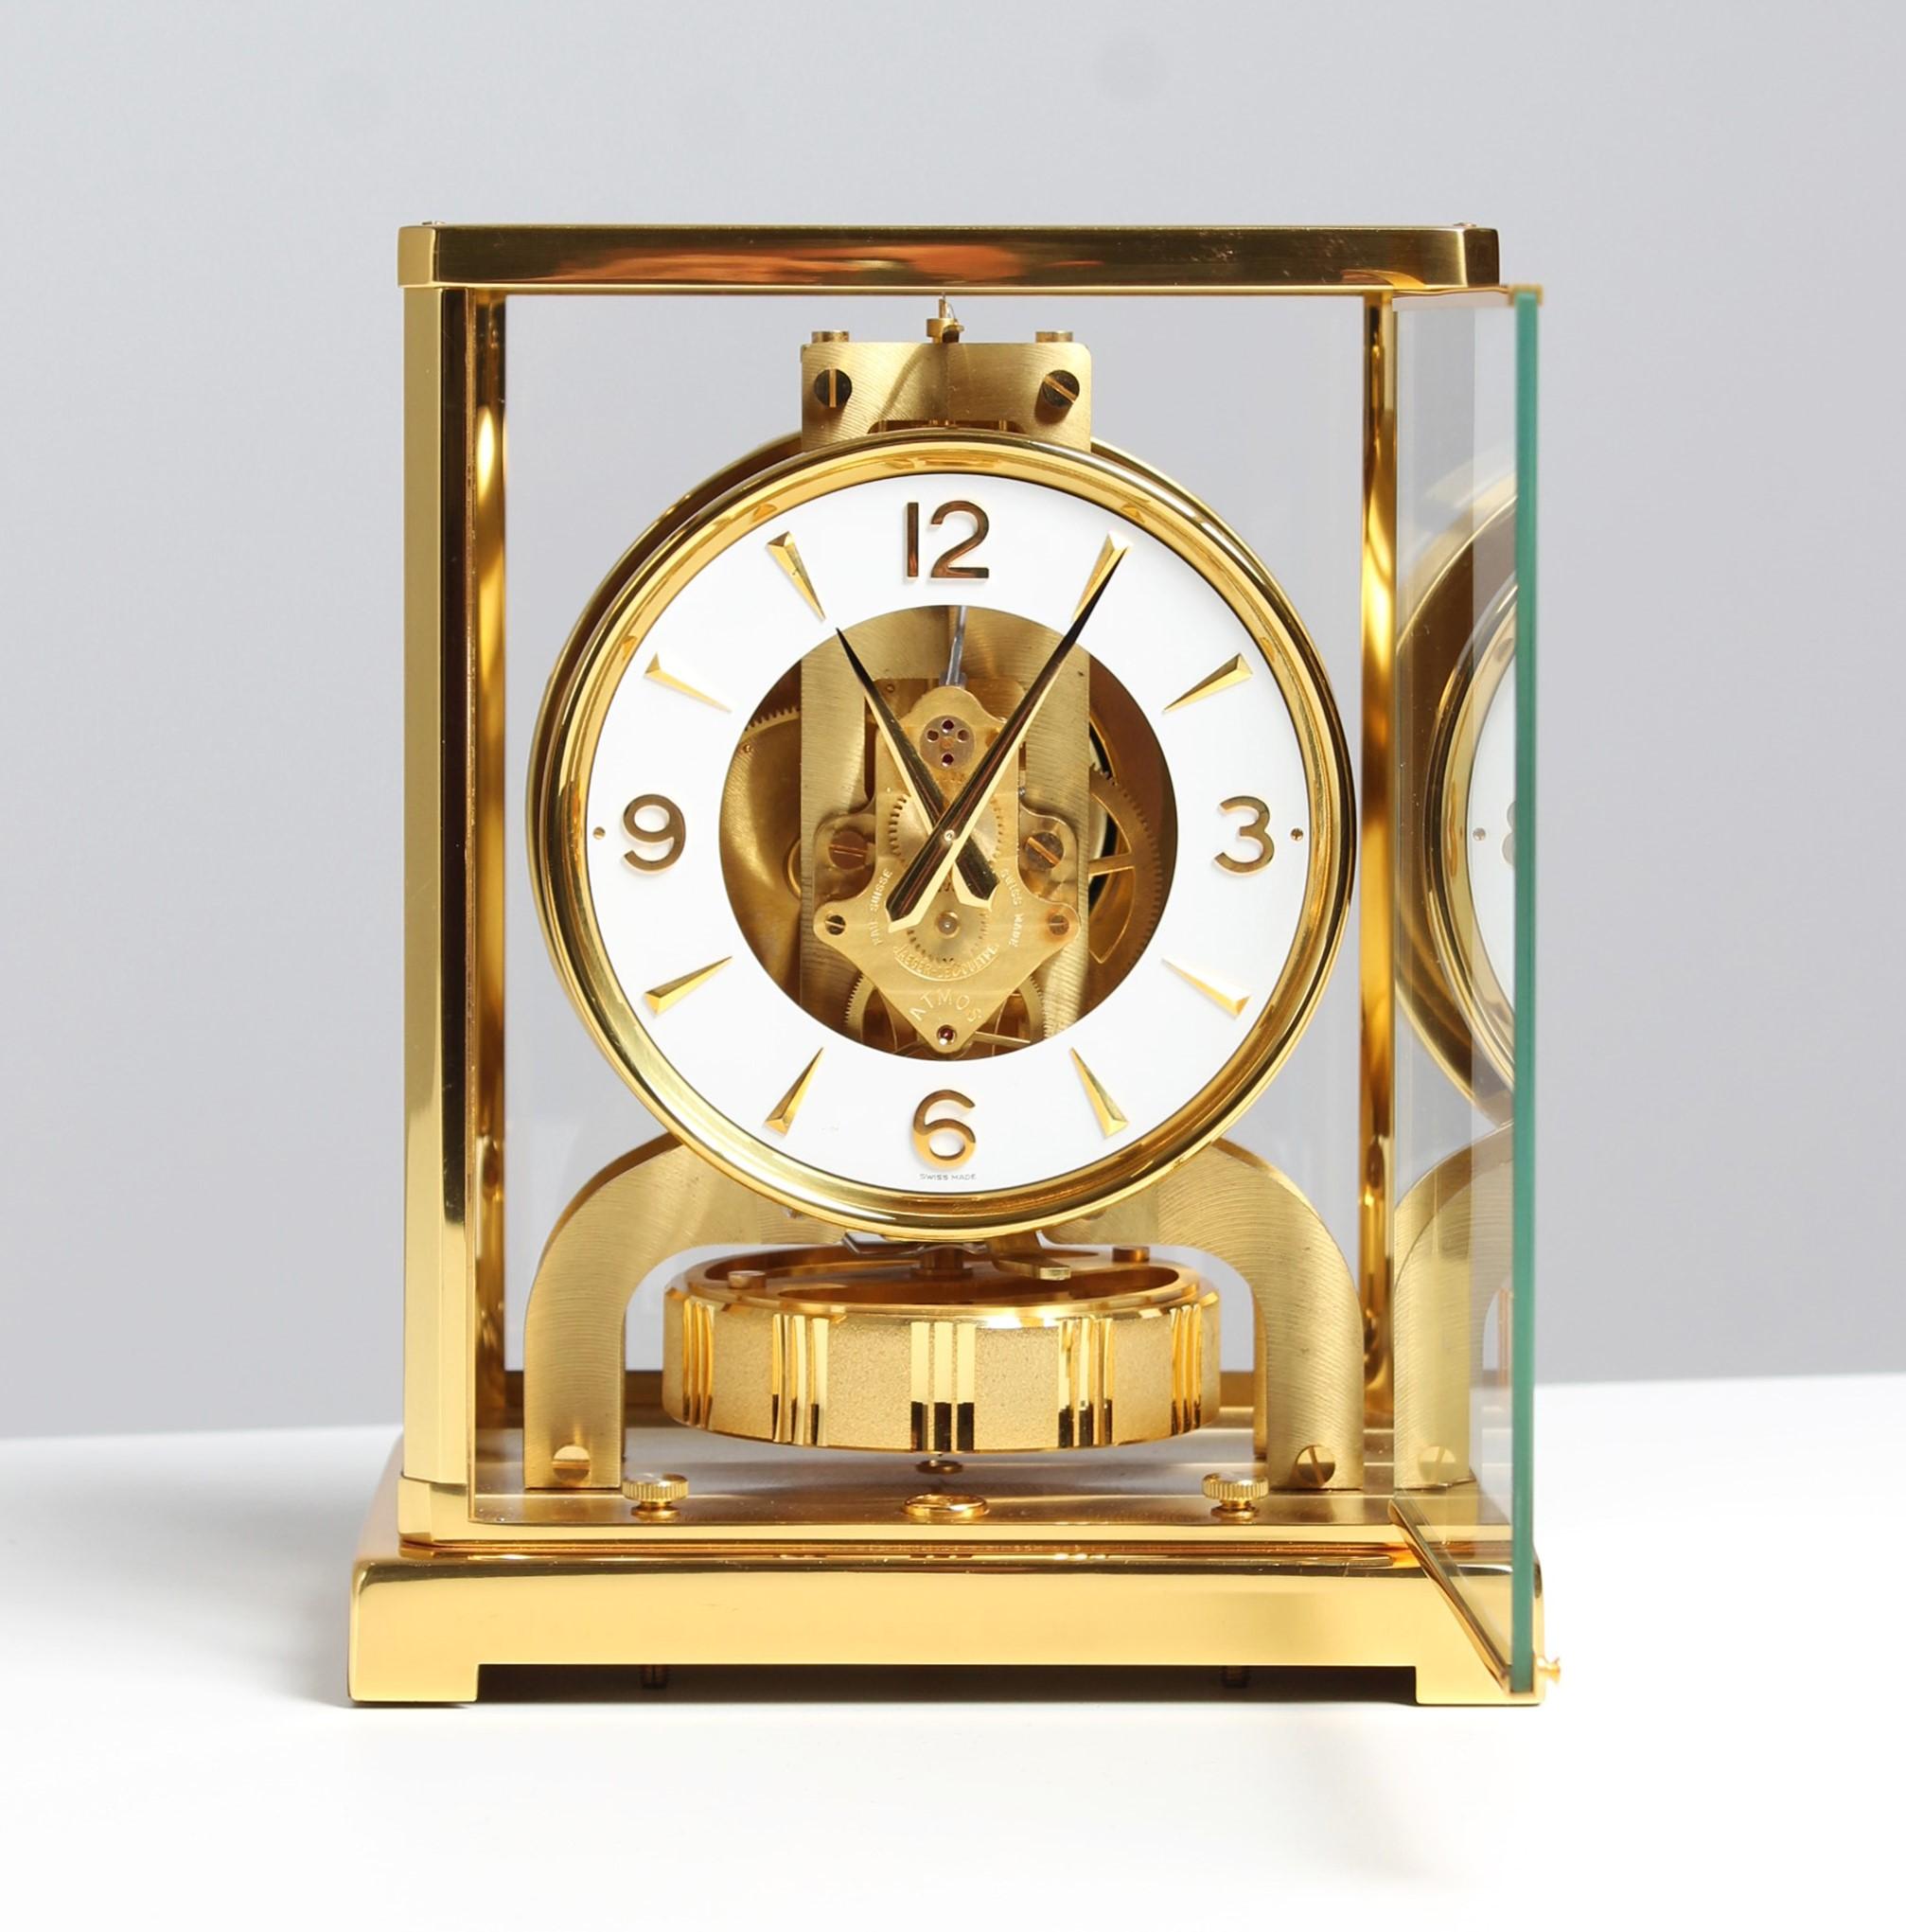 Jaeger LeCoultre - Atmos clock

Switzerland
Brass gold plated
Year of manufacture 1973

Dimensions: H x W x D: 22 x 18 x 13,5 cm

Description:
Atmos V caliber 526 in gold plated brass case.
Classic white dial ring with Arabic